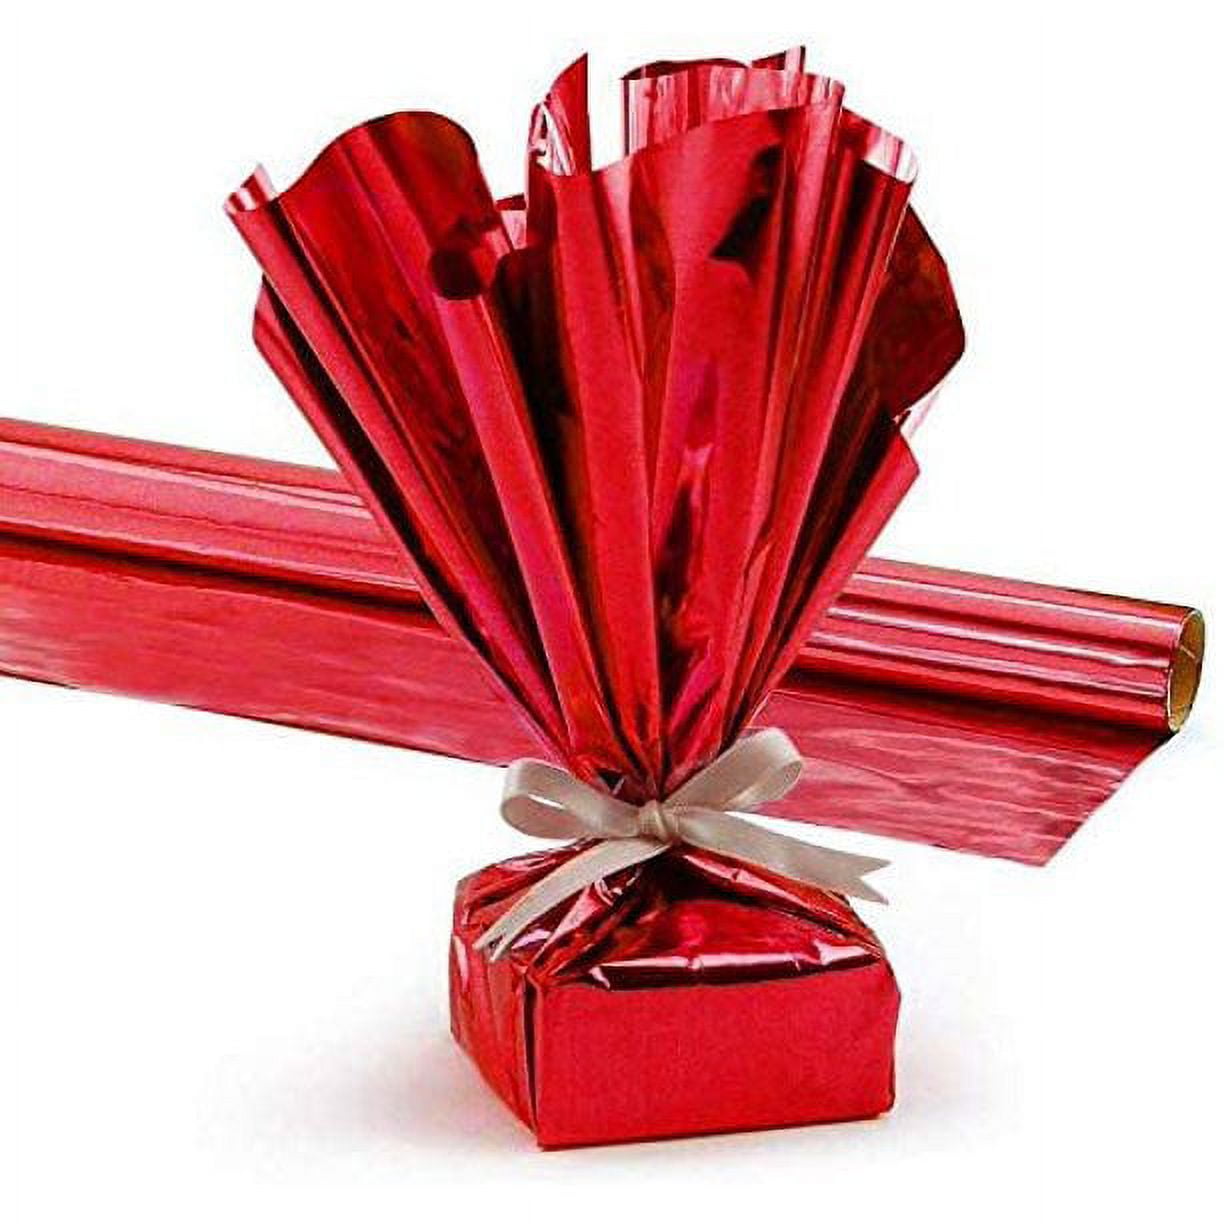 Matte Red Gift Wrap Rolls 5 ft x 30 in (8 Pieces)